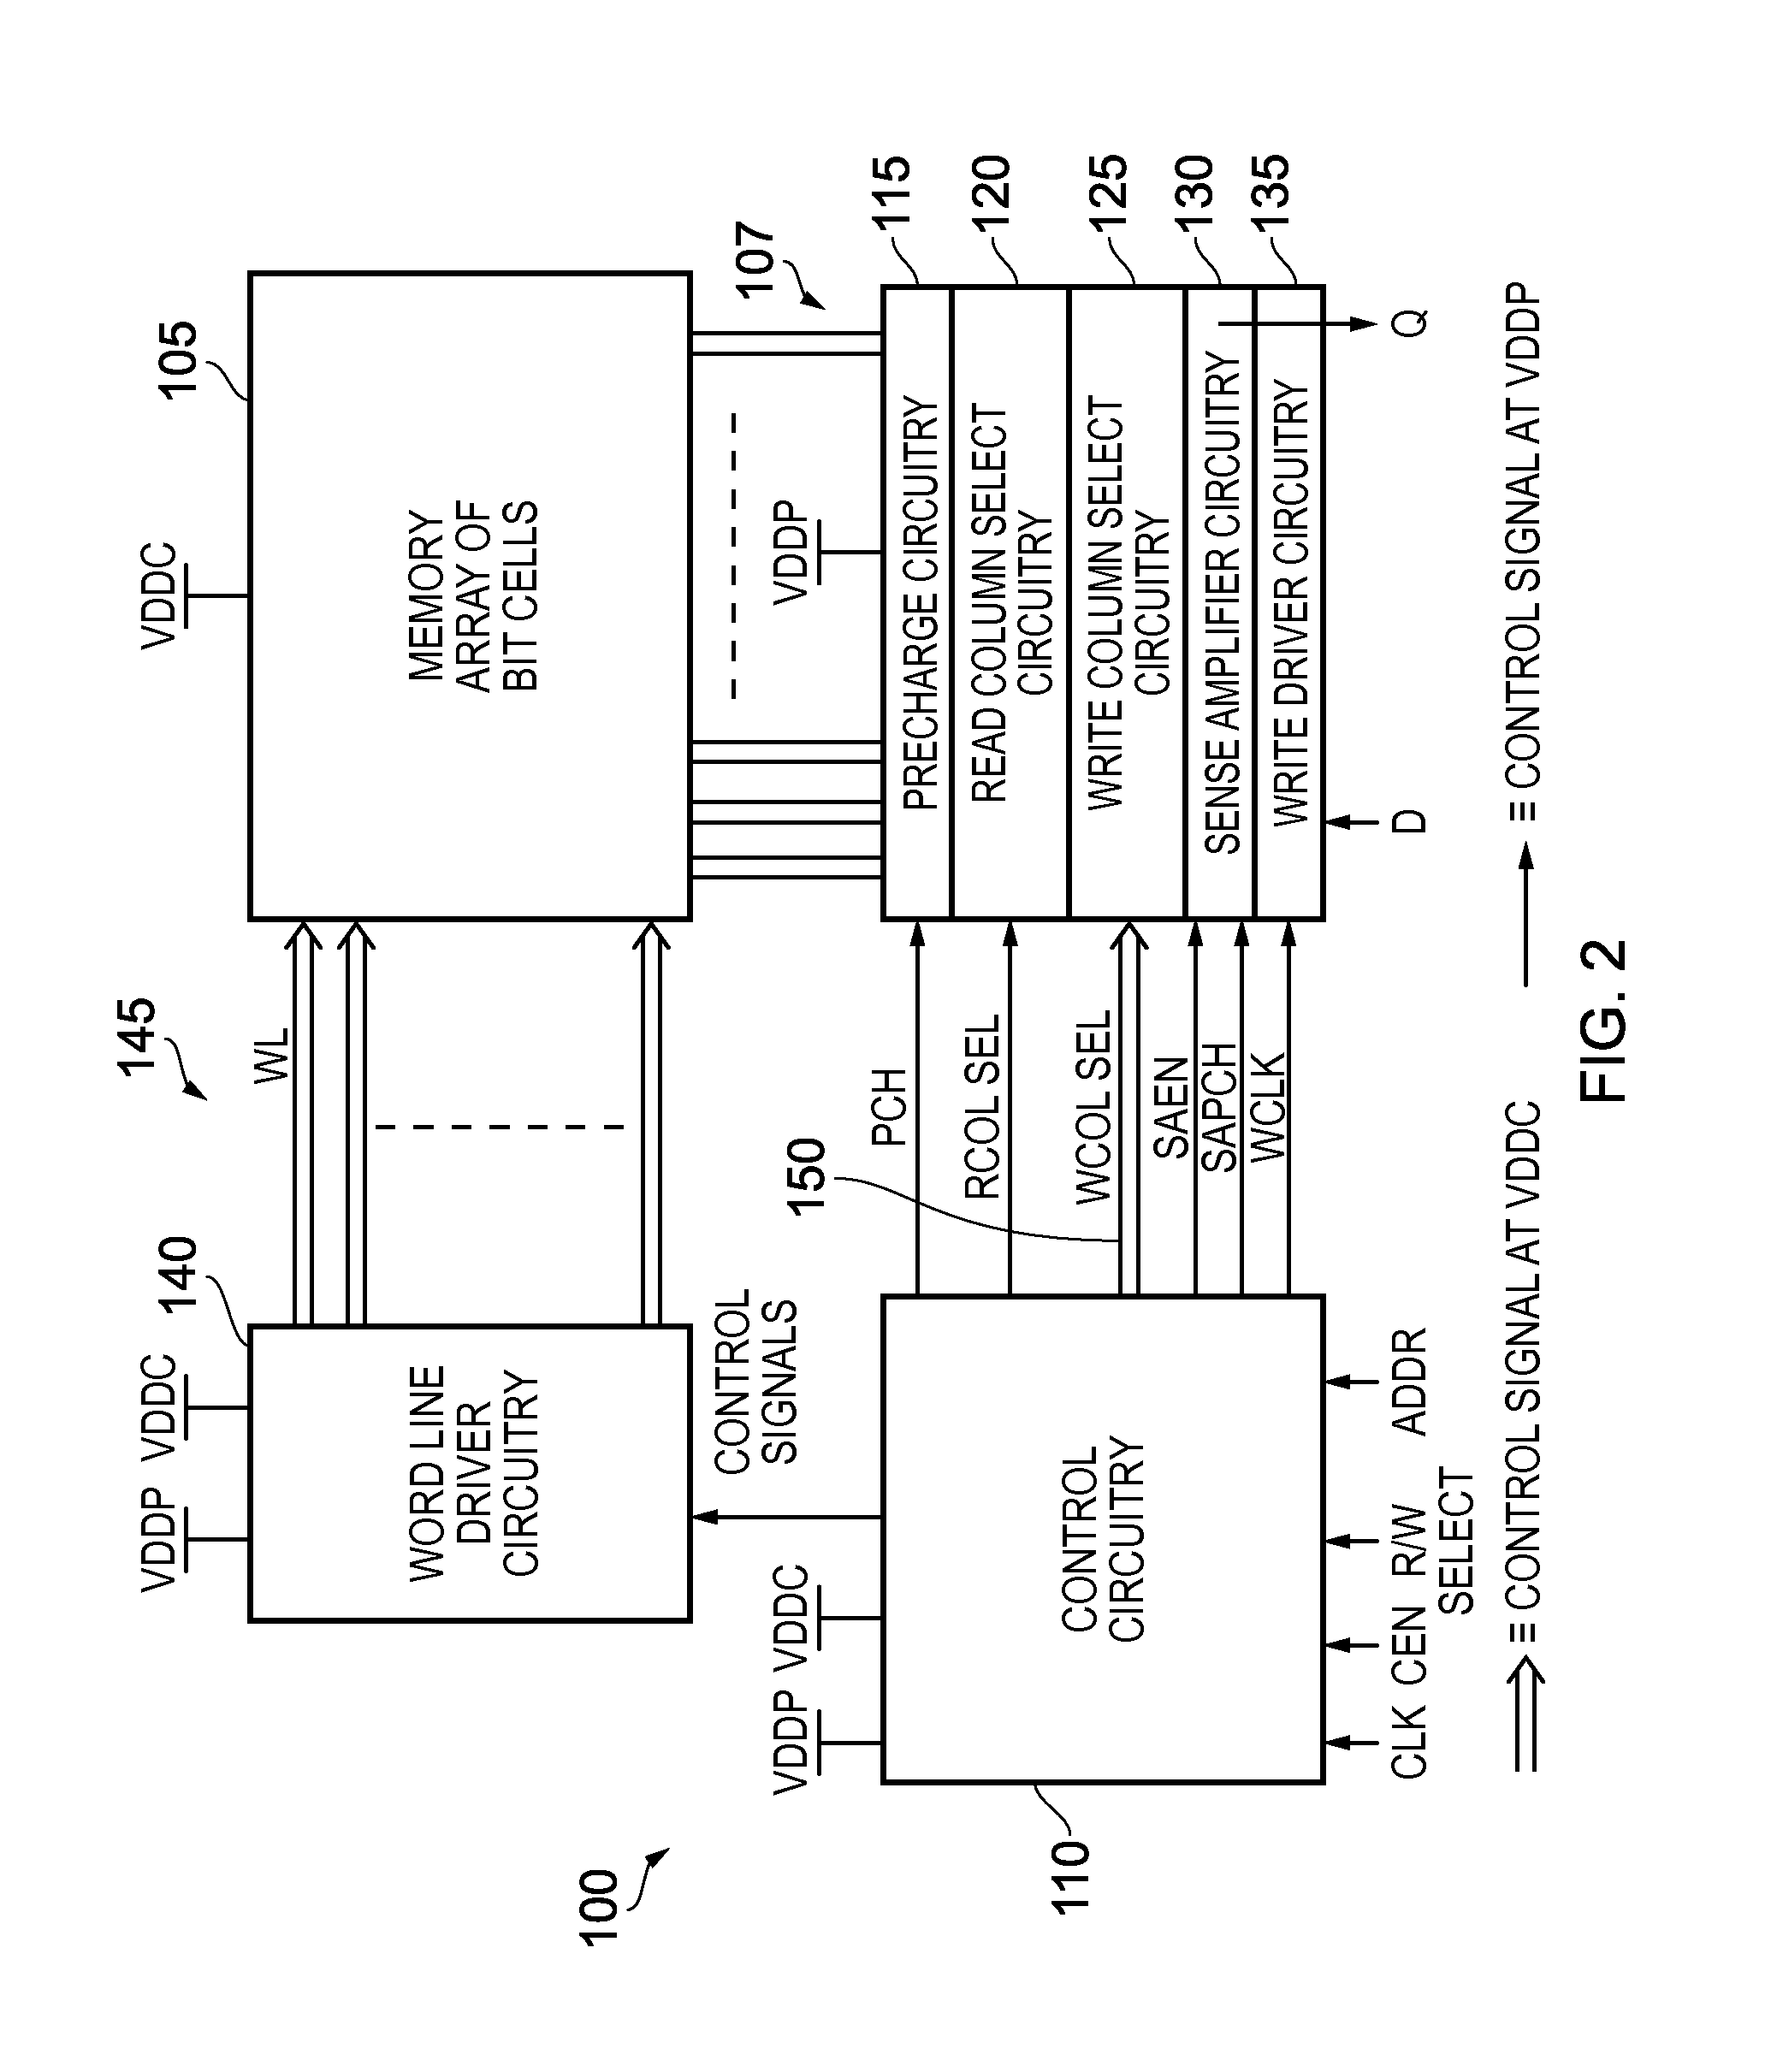 Memory device and method of operation of such a memory device